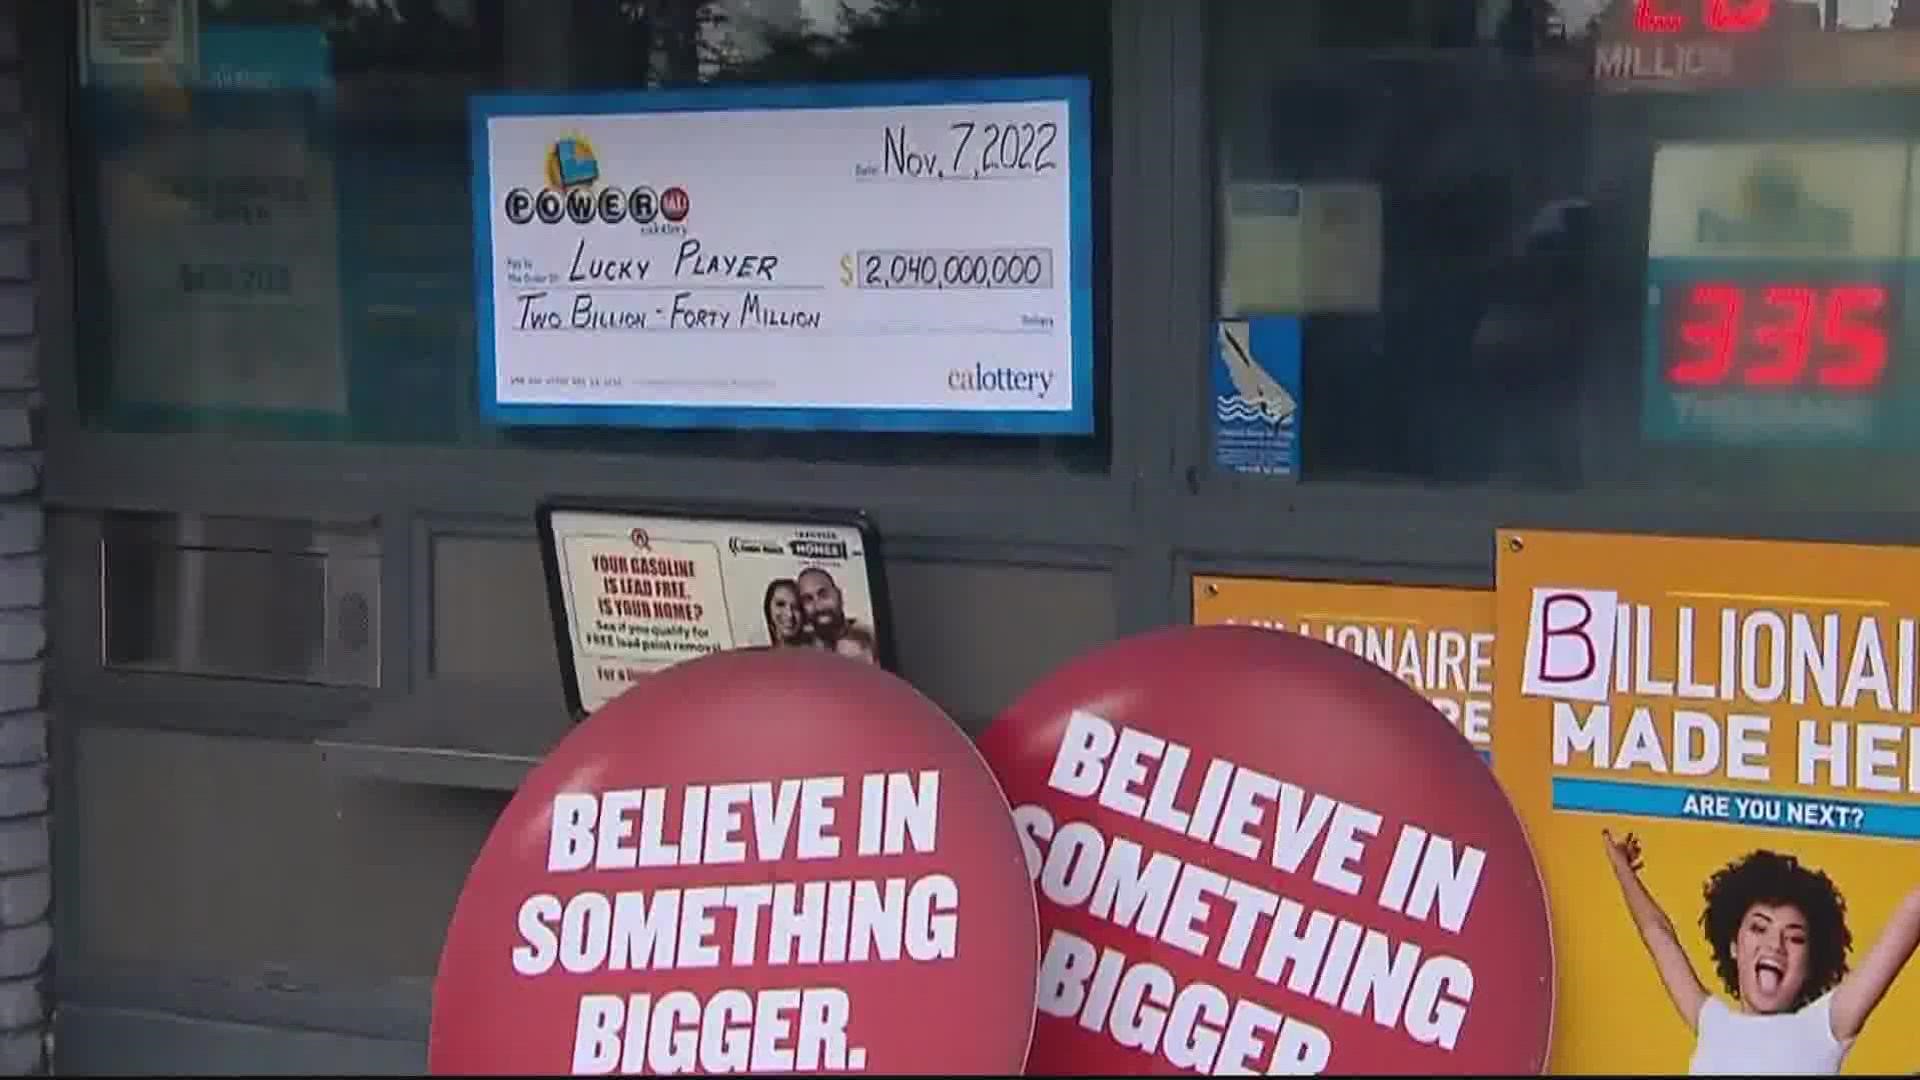 Powerball announced Tuesday a single winning ticket was sold in California for a world-record $2.04 billion jackpot.